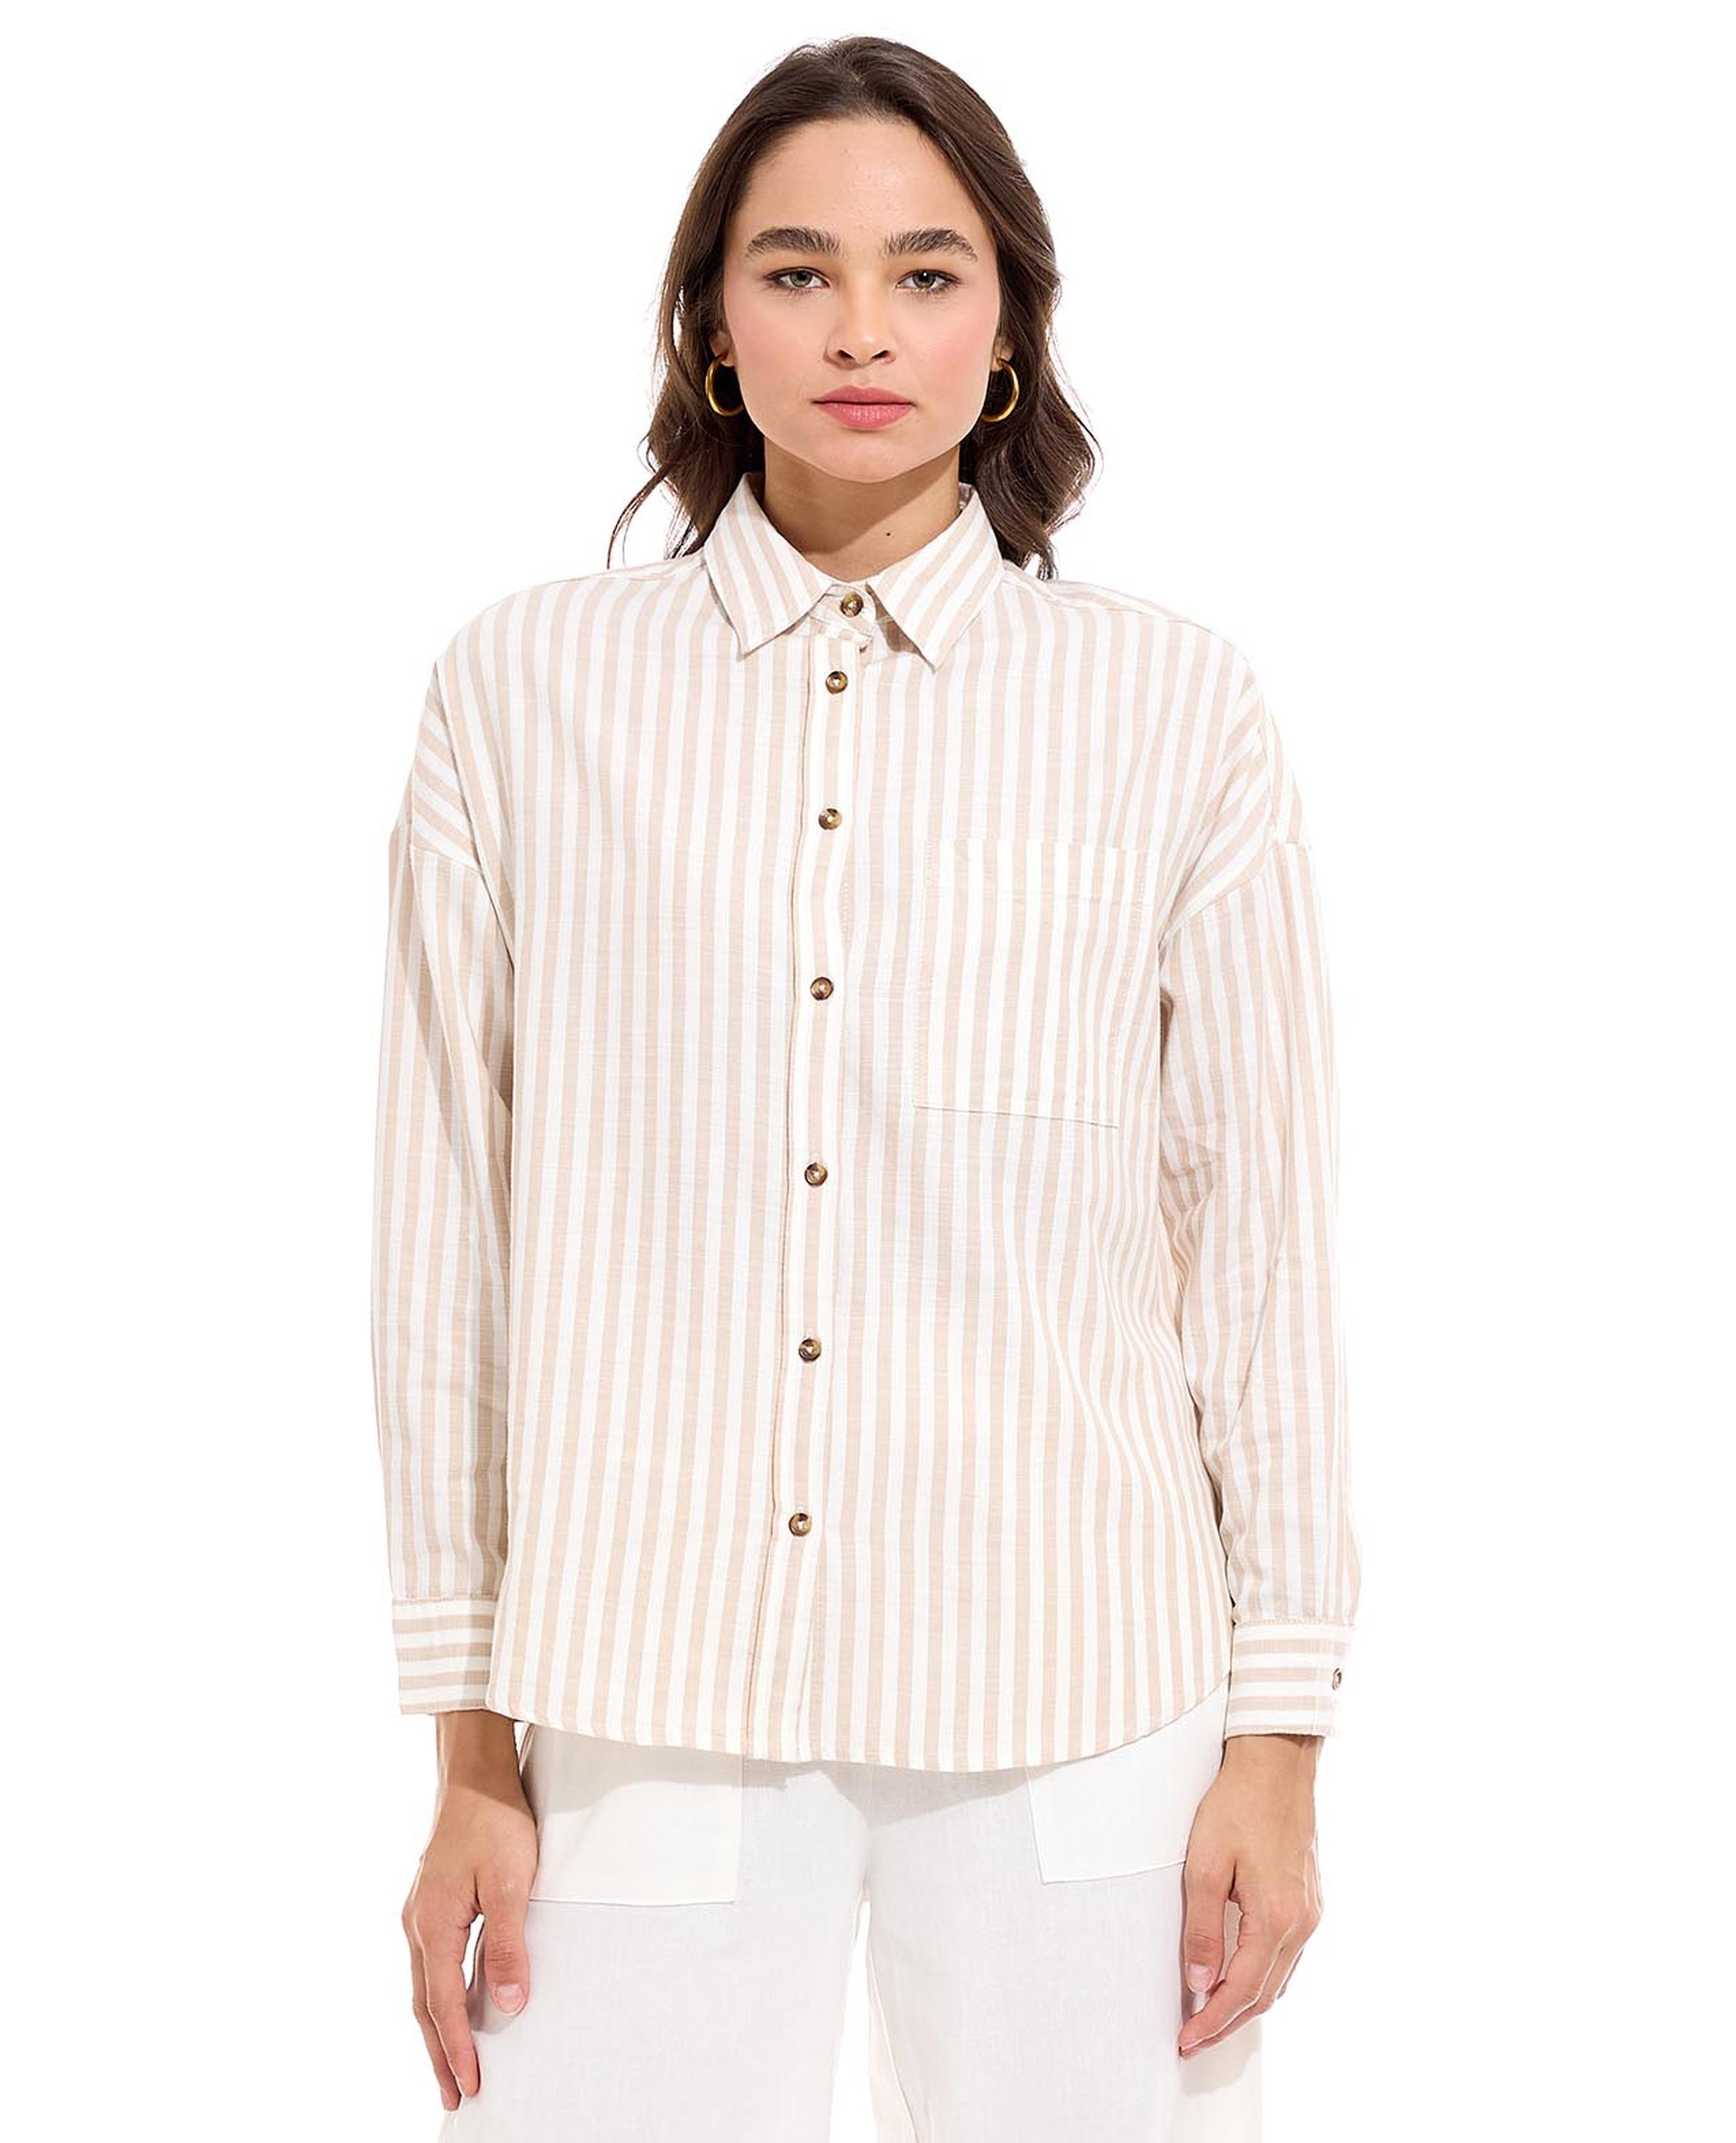 Striped Shirt with Spread Collar  Long Sleeves